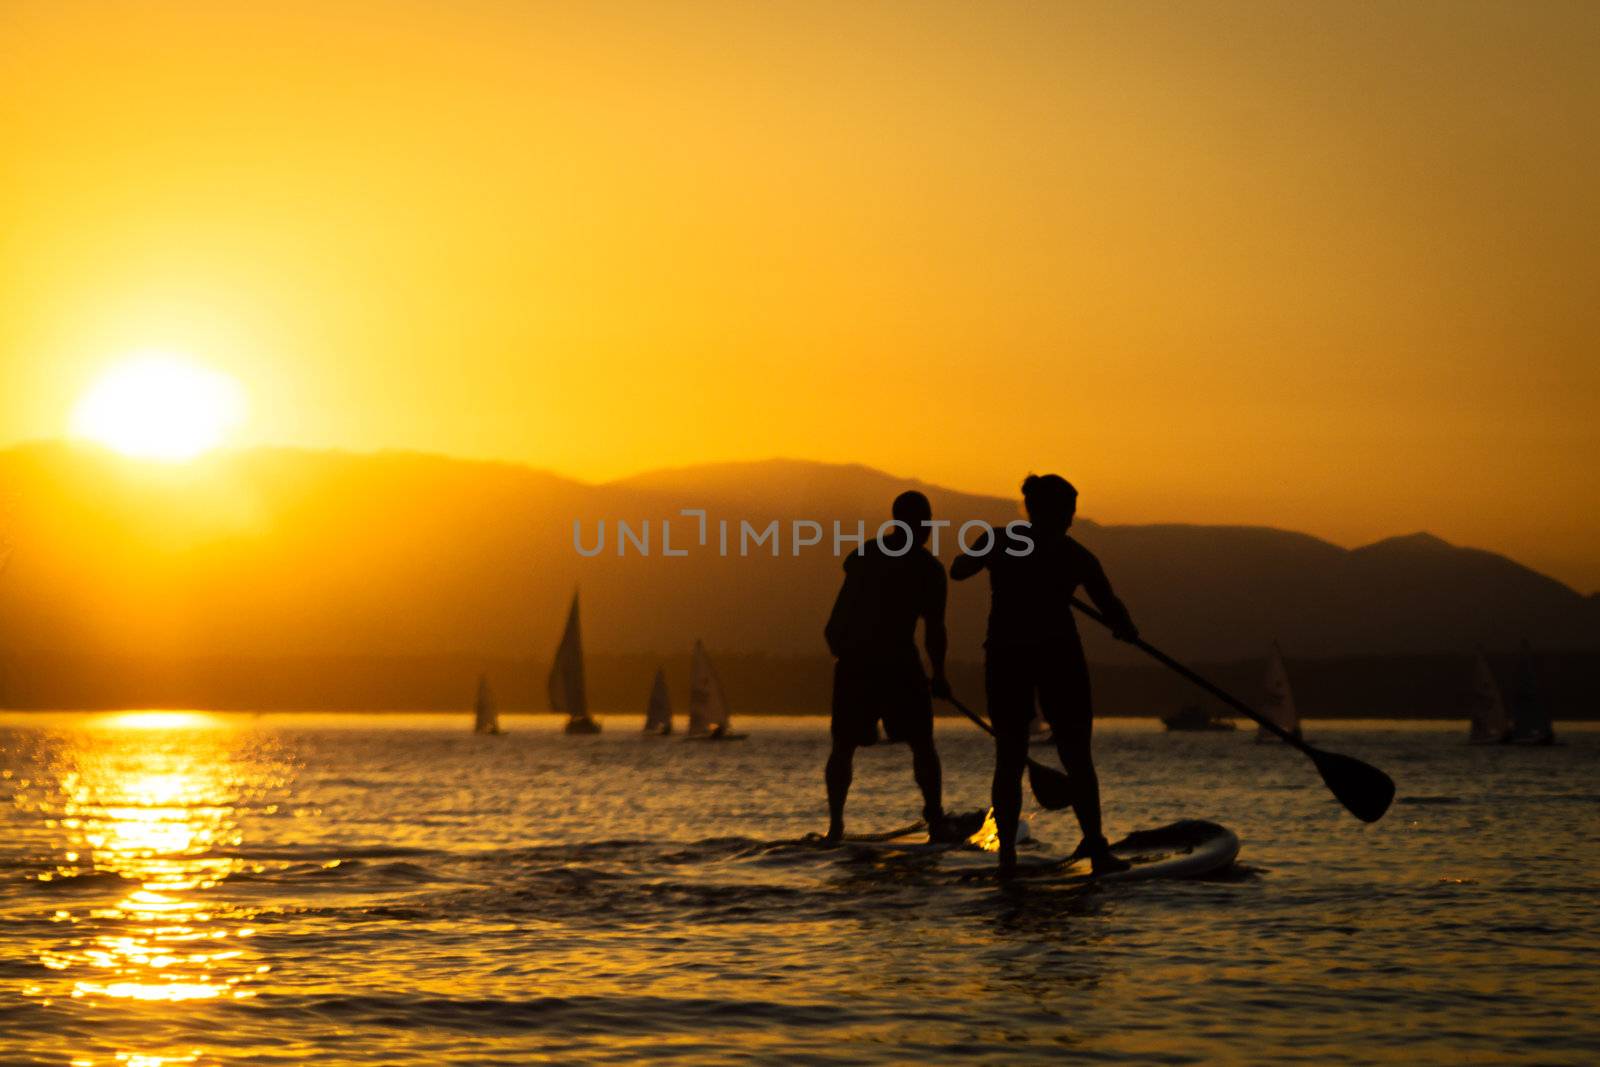 Couple paddling stand up paddle boards at sunset with mountains in background.